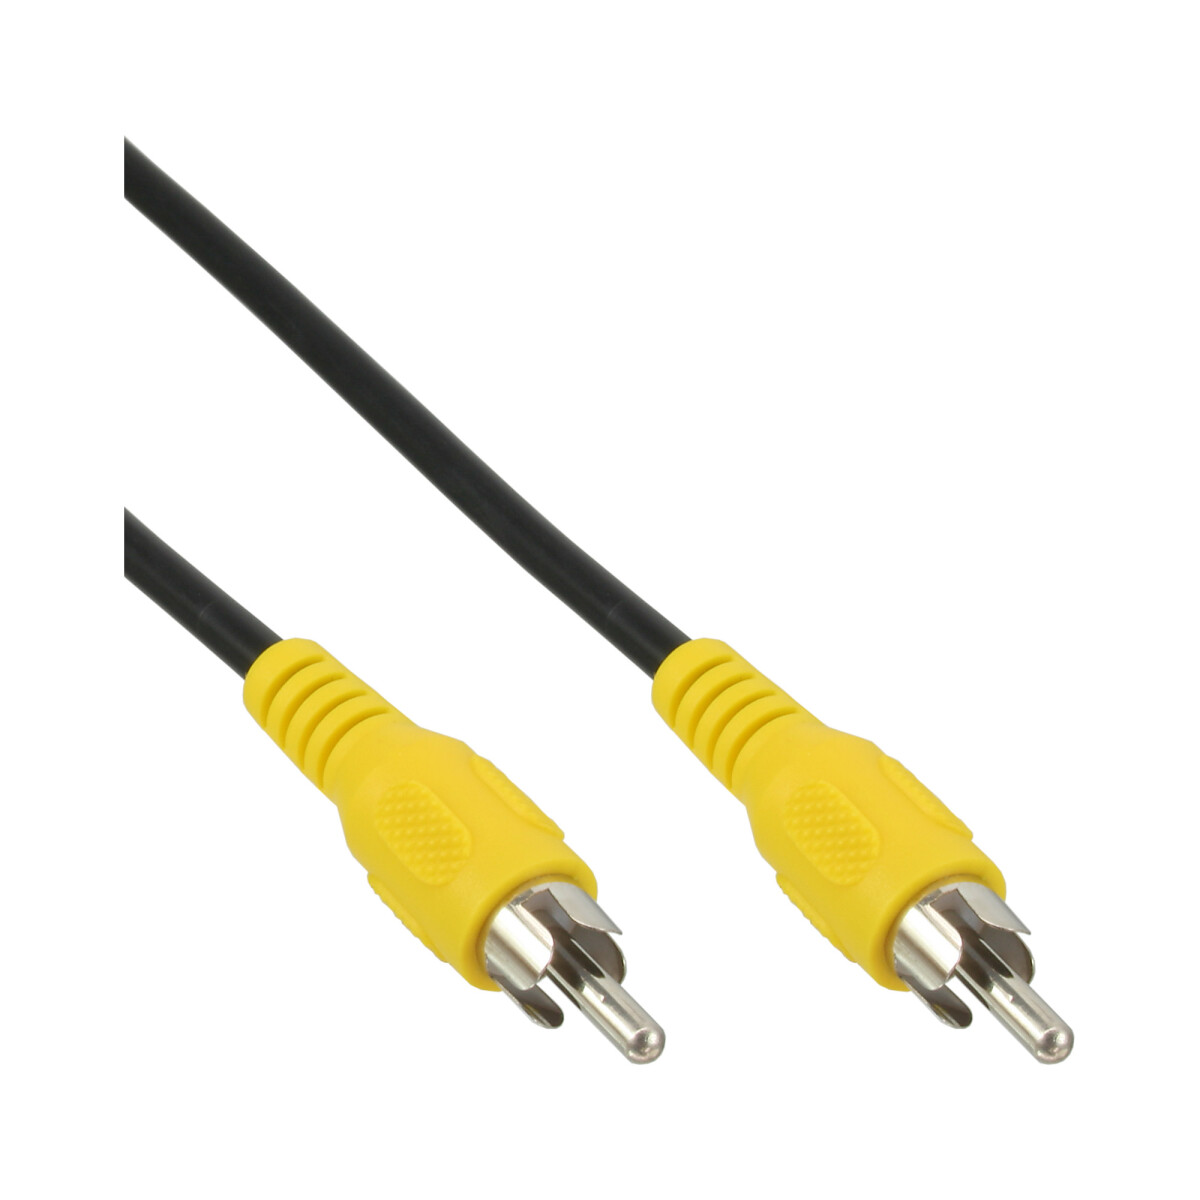 InLine® Video cable, 1x RCA M/M, yellow plugs, 0.5m